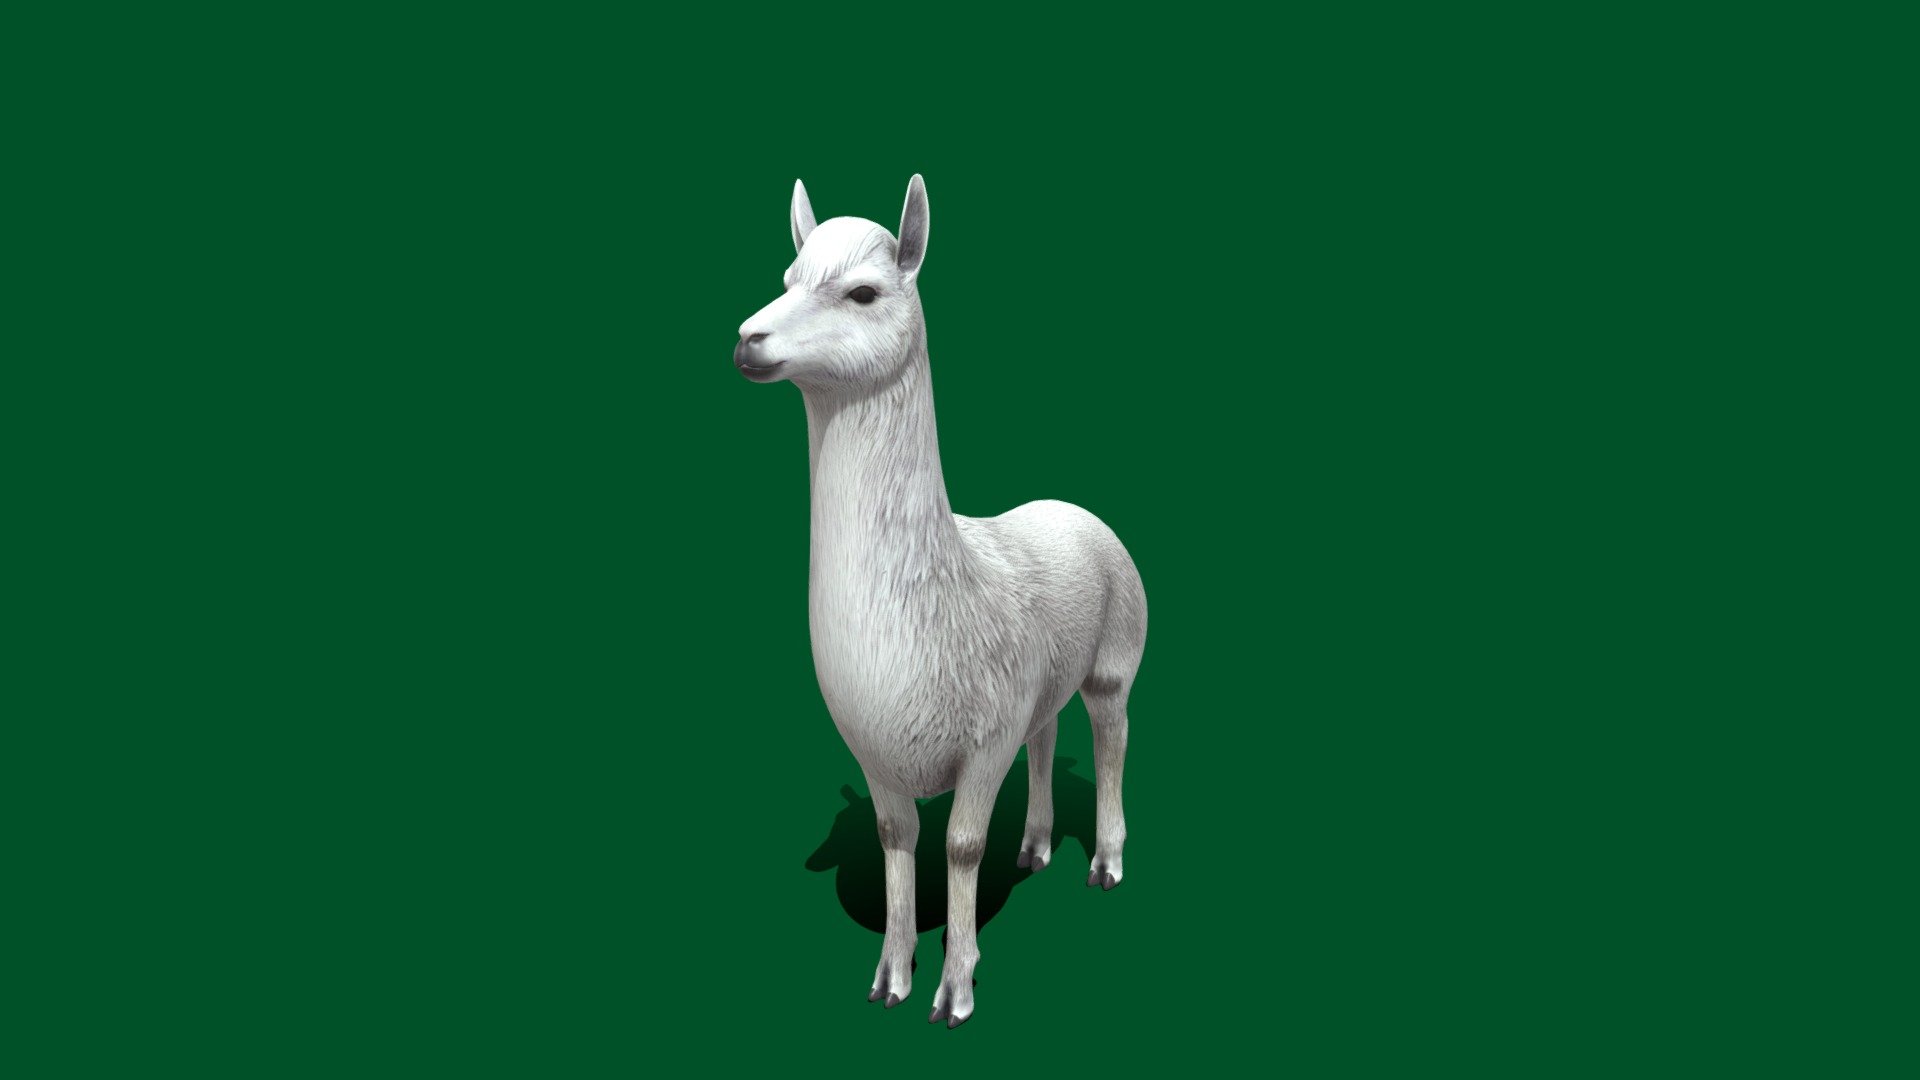 Game Readyhttps://skfb.ly/ourKT
The alpaca is a species of South American camelid mammal. It is similar to, and often confused with, the llama. However, alpacas are often noticeably smaller than llamas. The two animals are closely related and can successfully crossbreed. 
for complete animation game ready pls contact me thank you - Alpaca (Non-Commercial) - Download Free 3D model by Nyilonelycompany 3d model